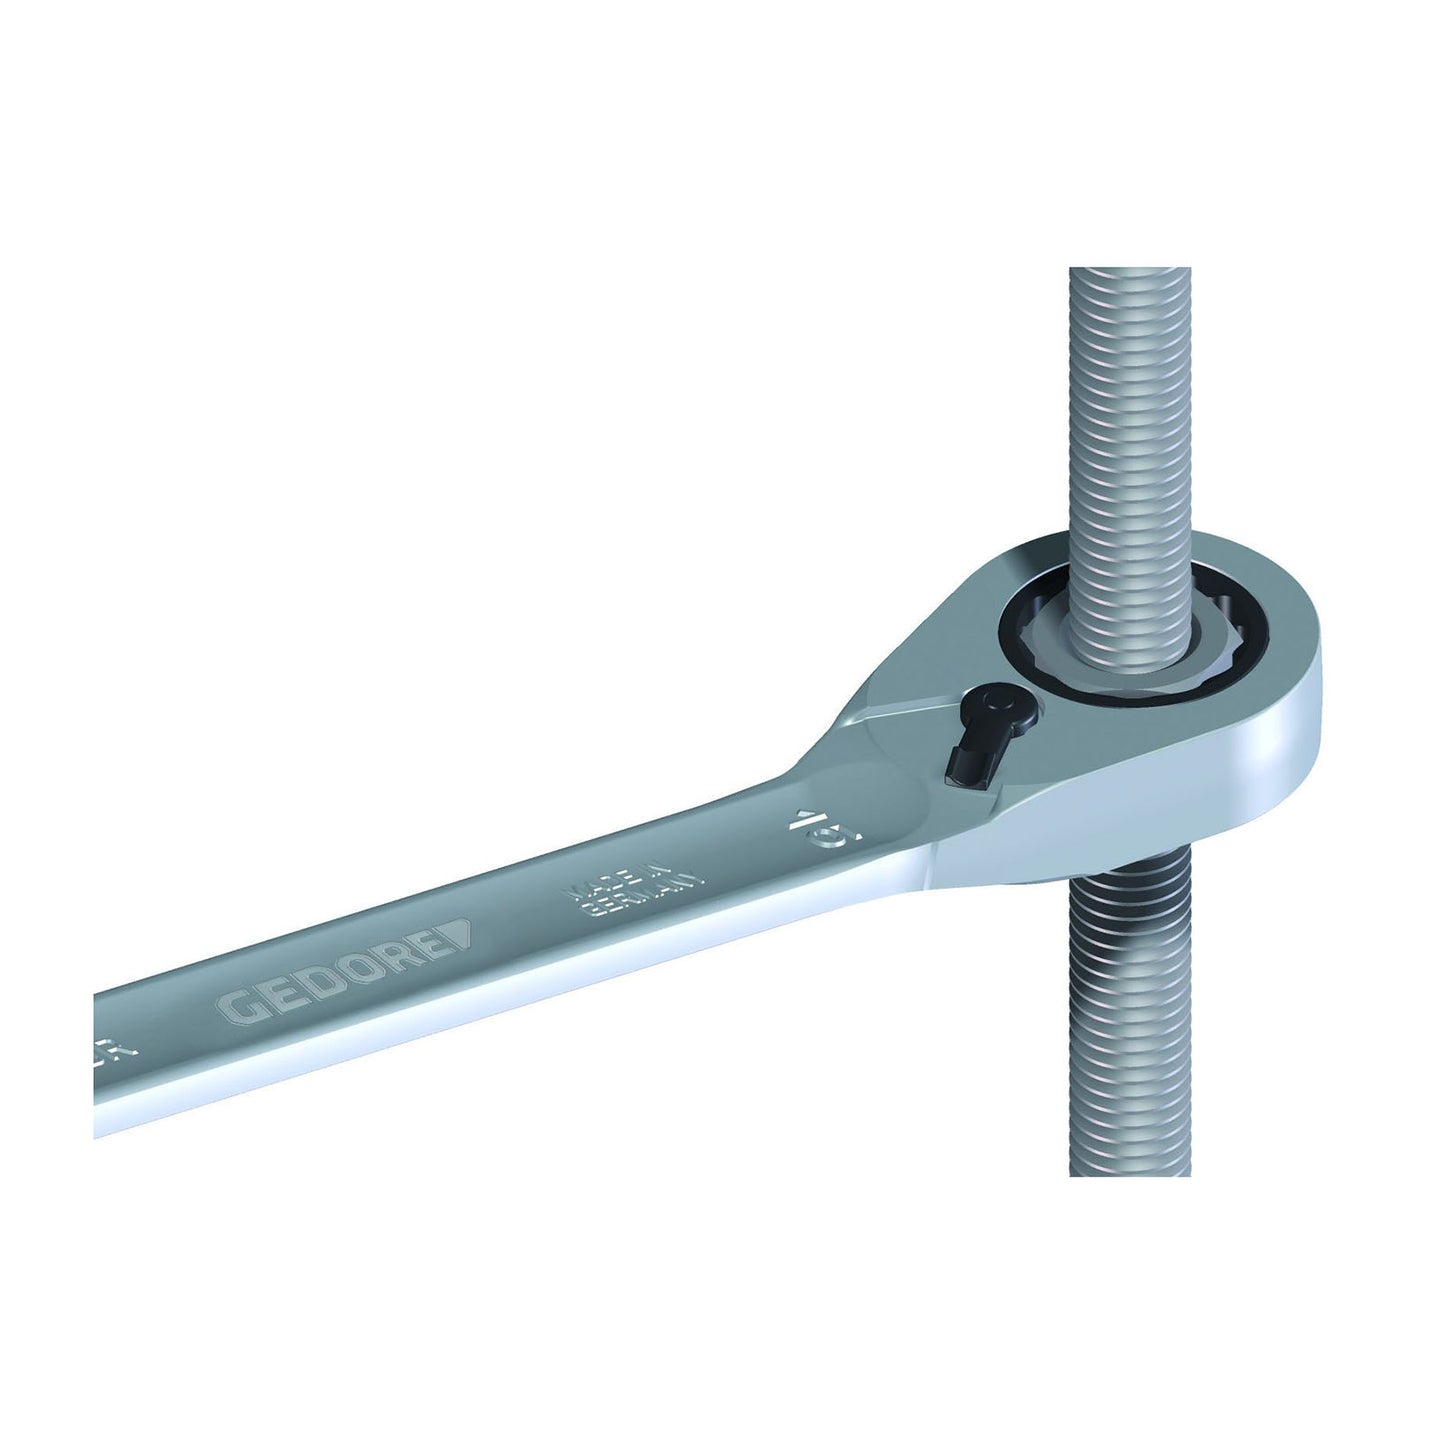 GEDORE 7 UR 13 - Ratchet combination wrench, 13mm (2297302)